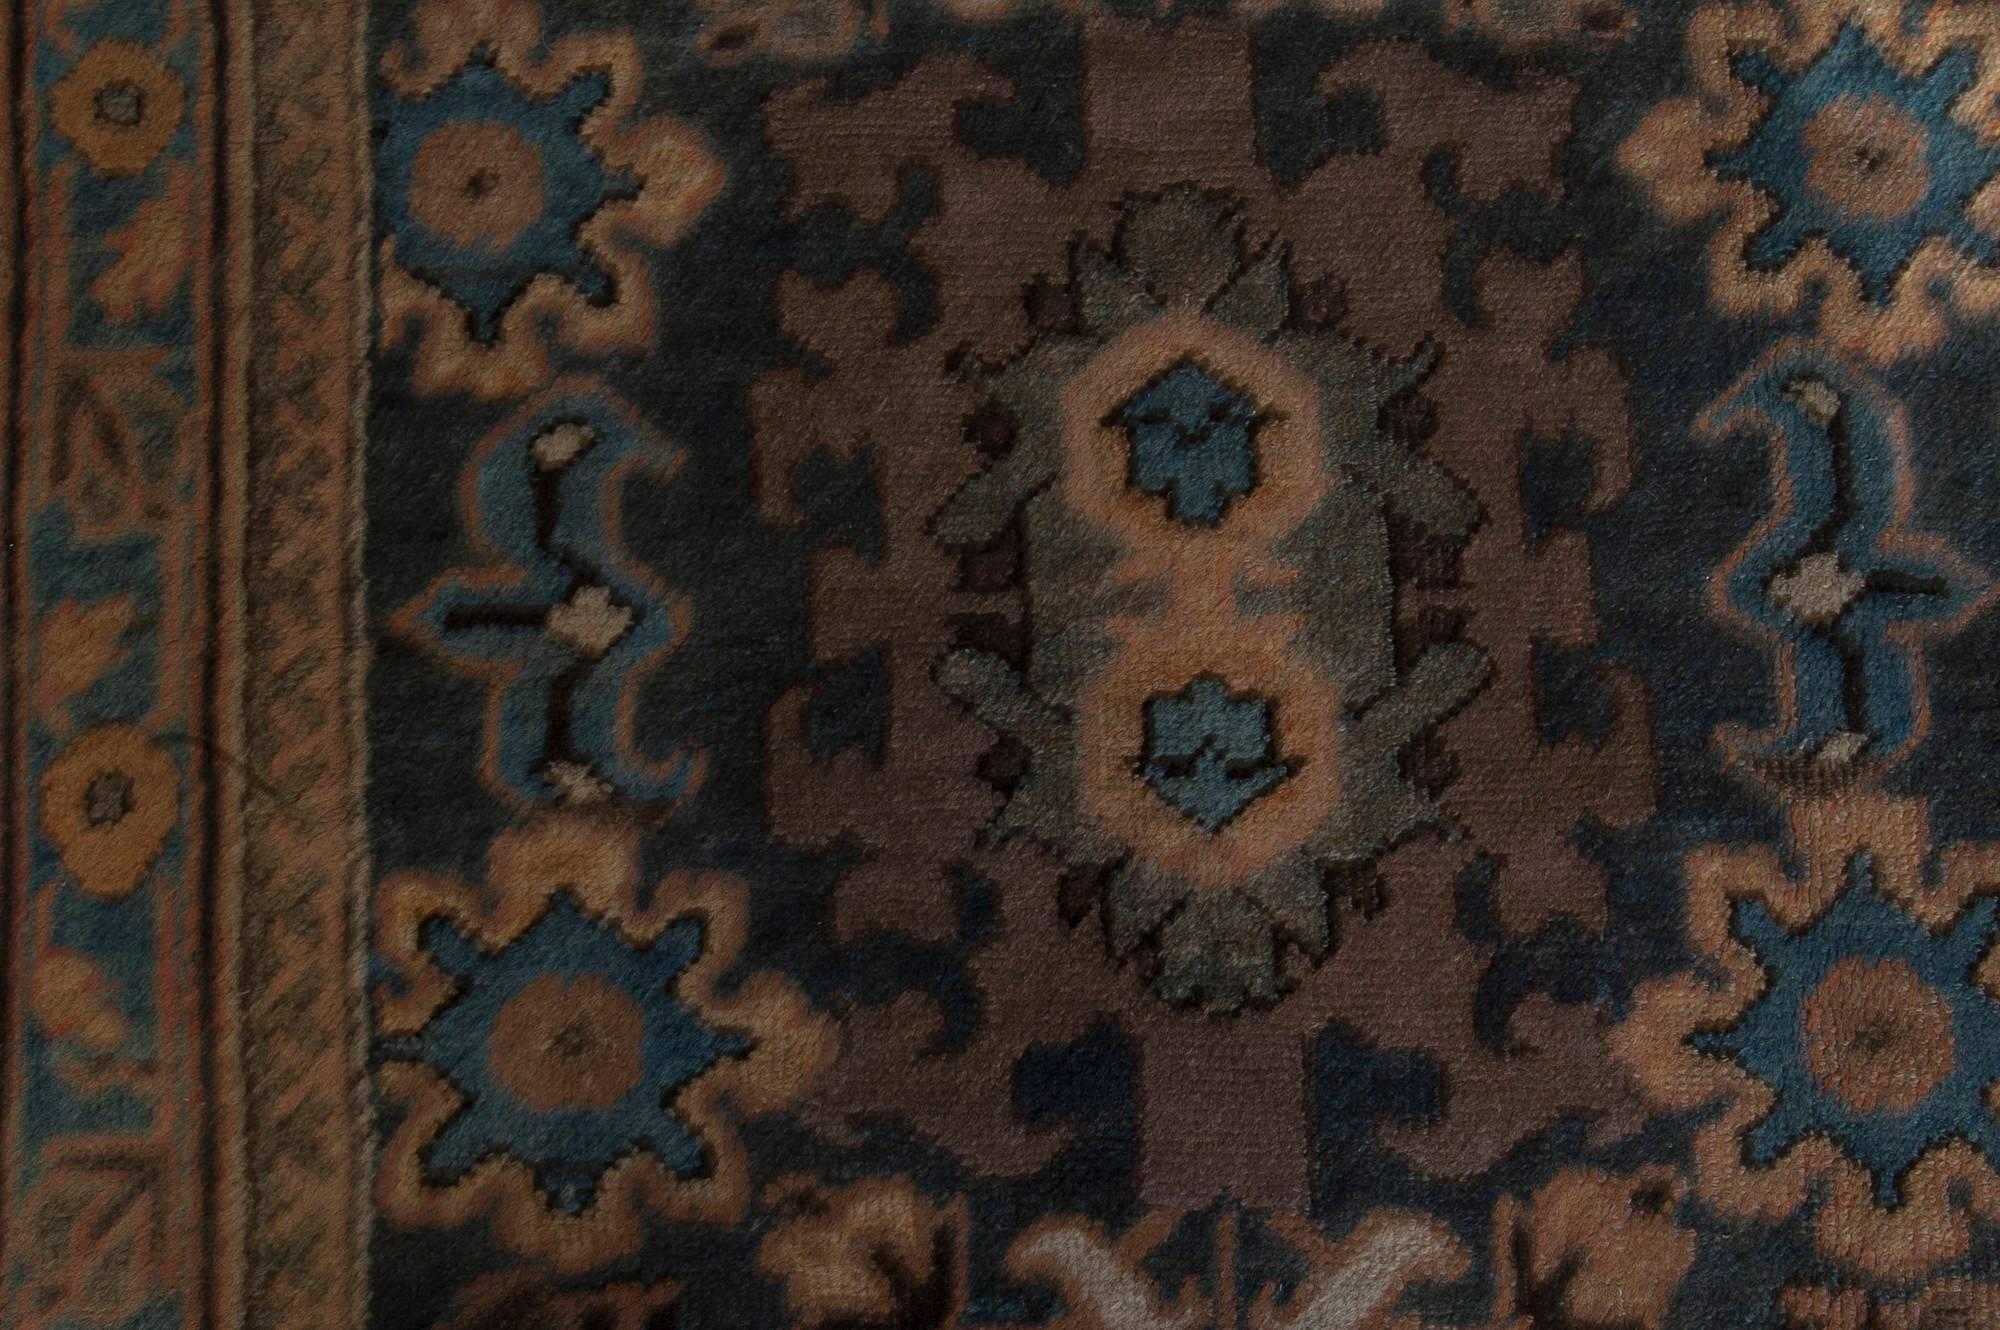 Authentic 19th Century Persian Sultanabad Handmade Wool Rug
Size: 12'2